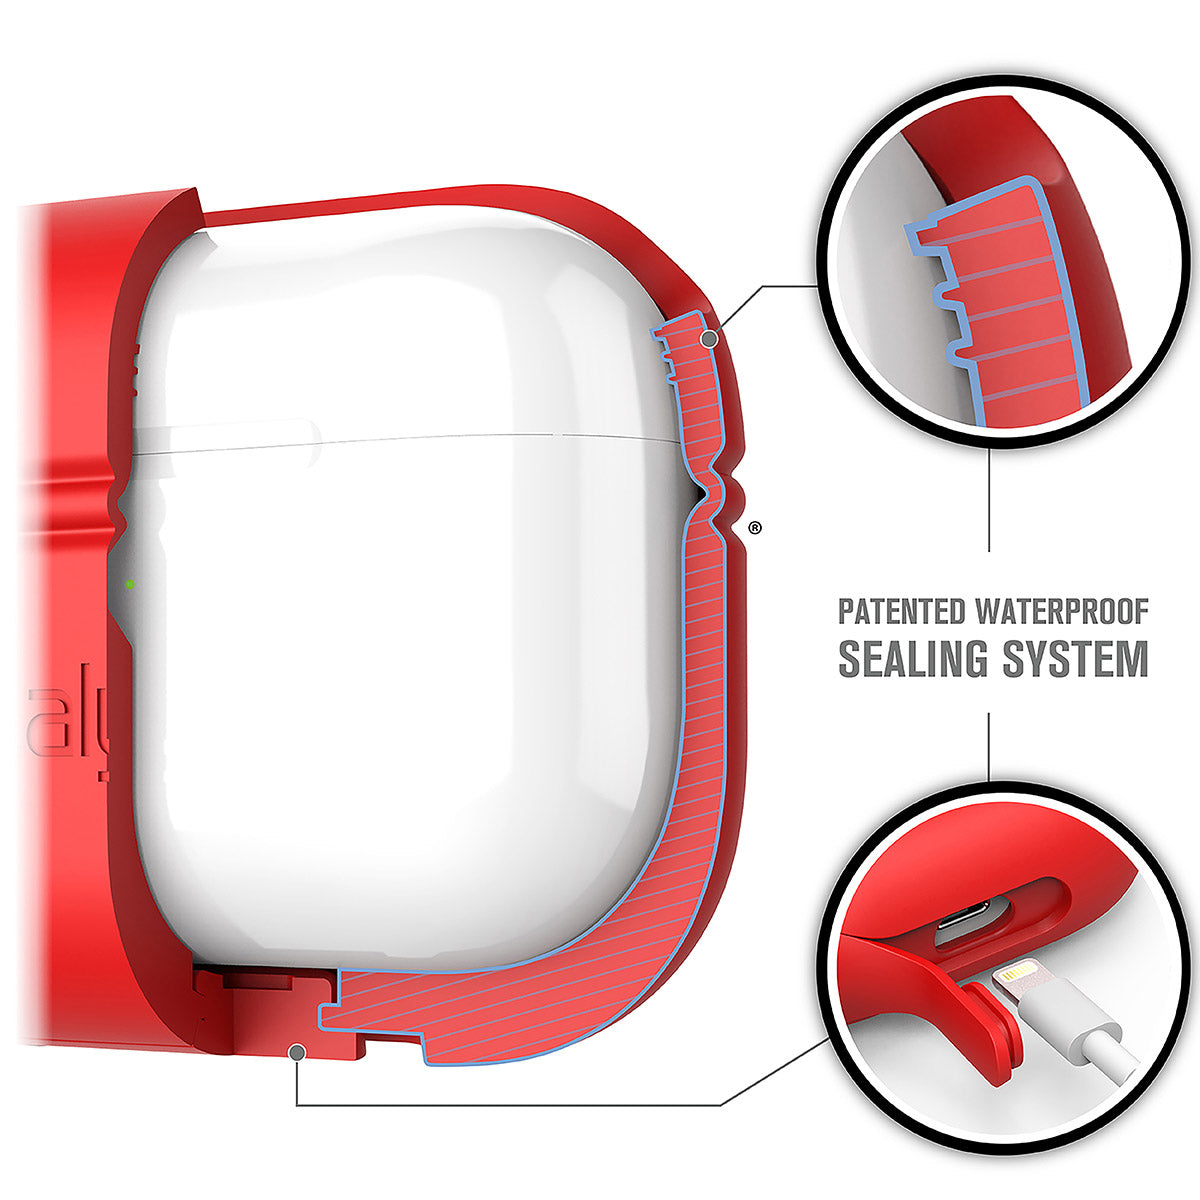 catalyst airpods pro gen 2 1 waterproof case carabiner special edition red showing the patented waterproof sealing system texts reads patented waterproof sealing system